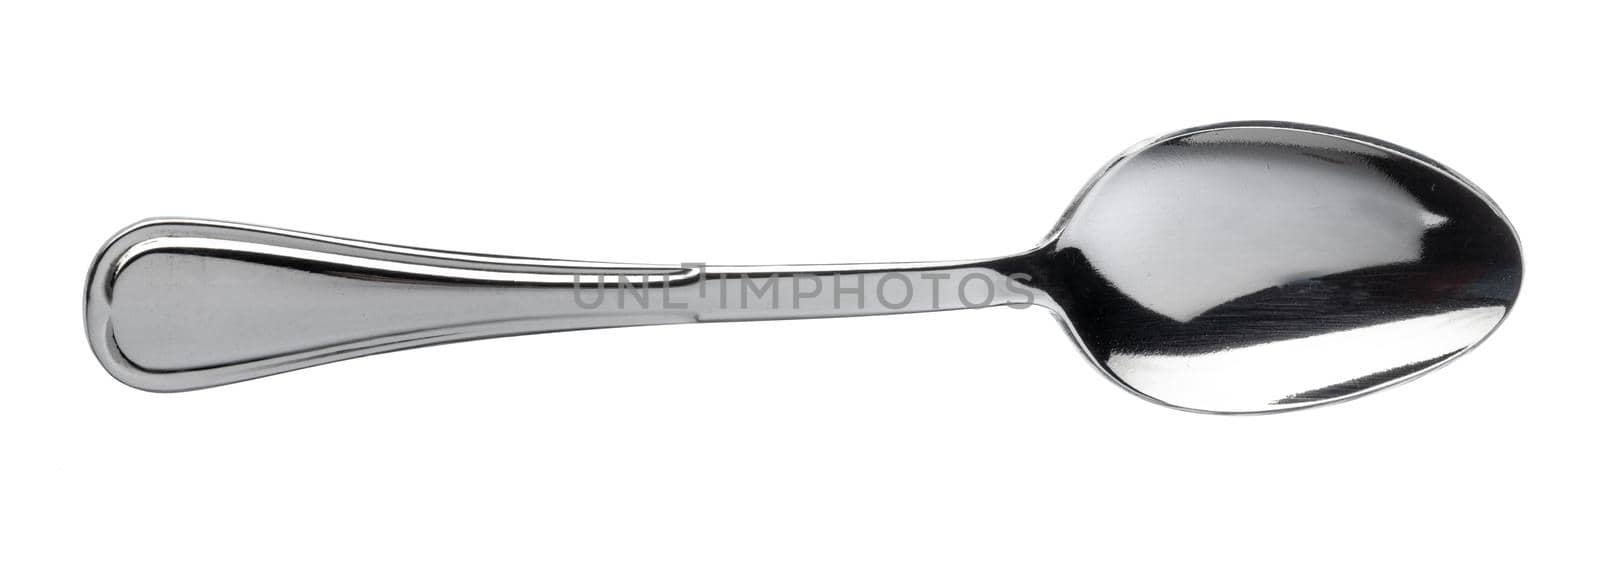 Silver spoon cutlery isolated on white background by Fabrikasimf